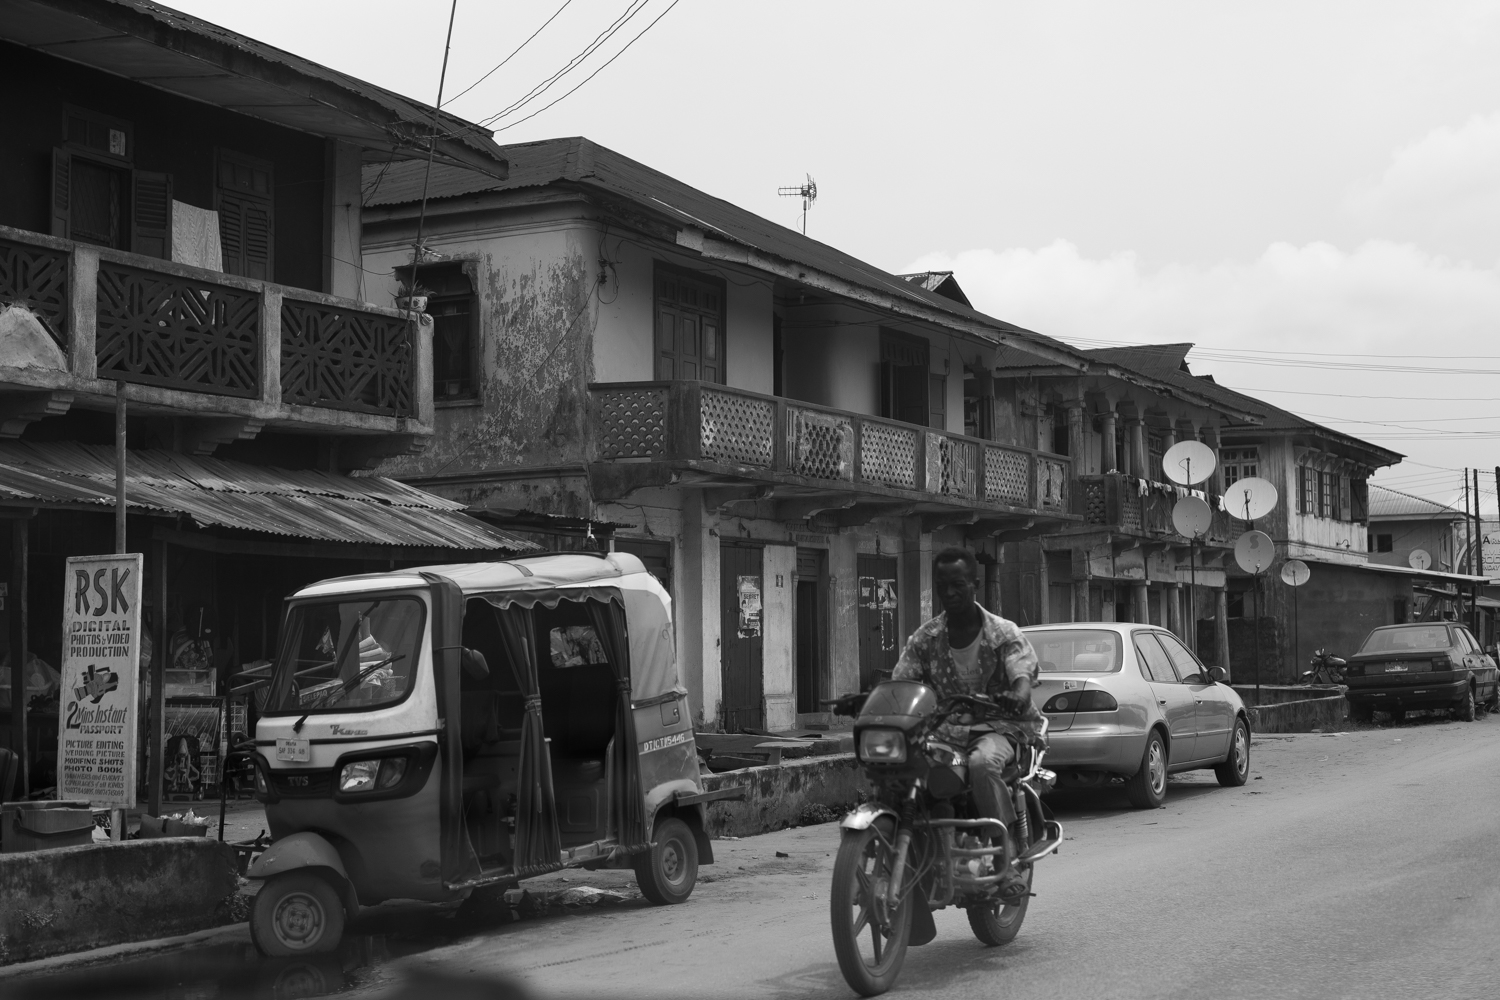 Motorcycle passing by colonial buildings in Sapele